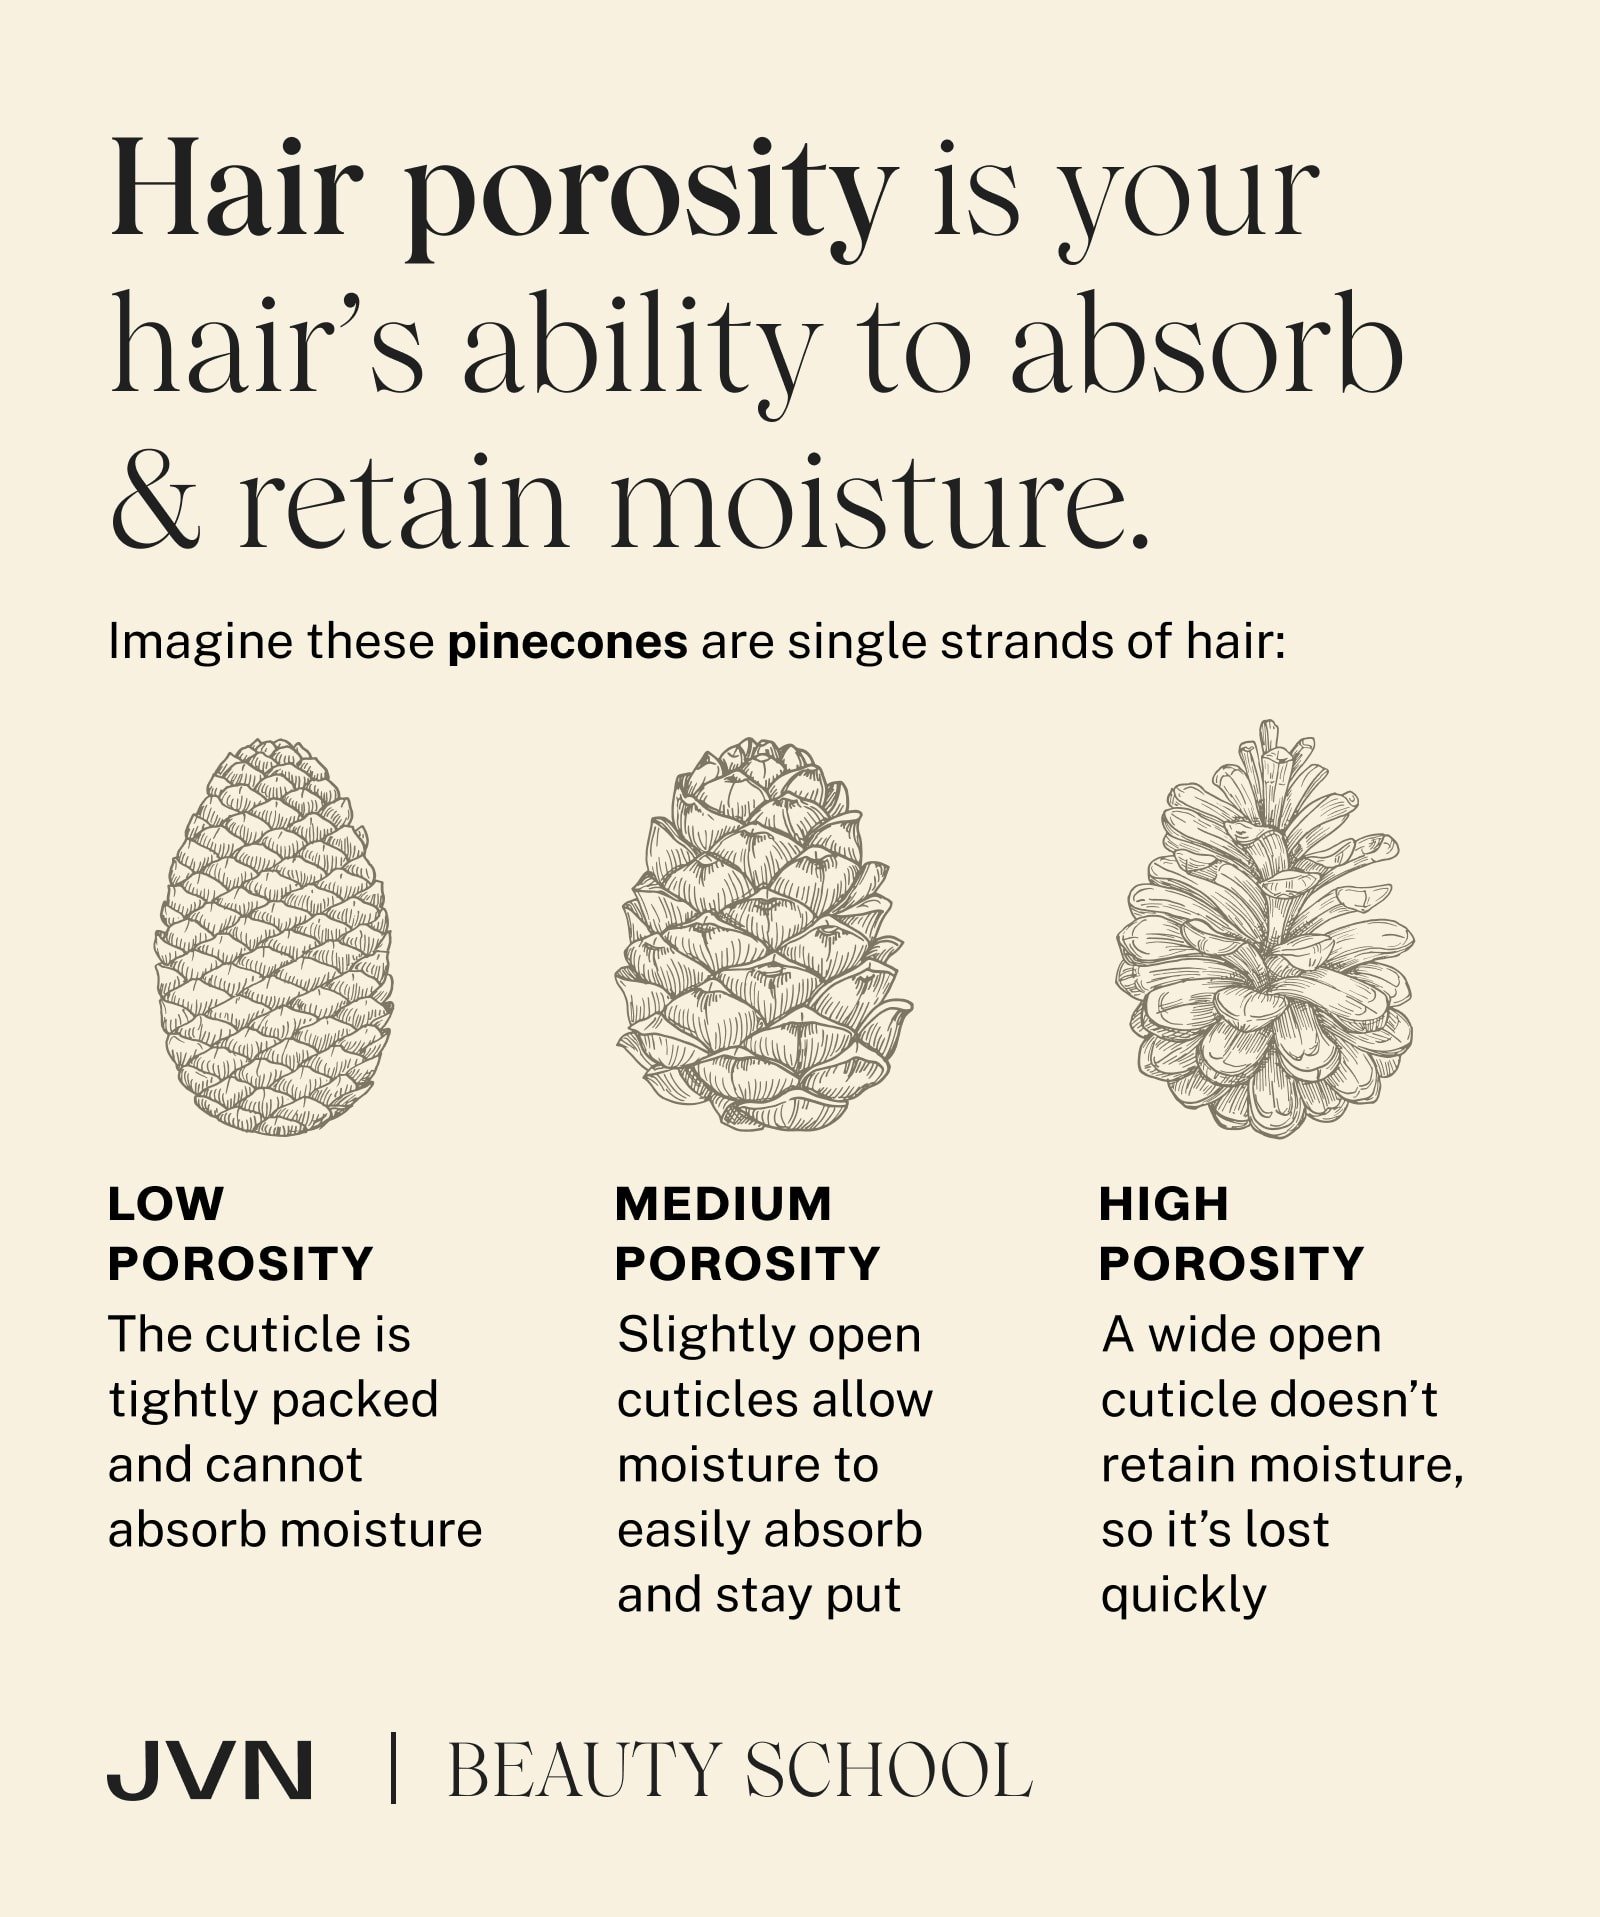 Hair porosity is your hair's ability to absorb and retain moisture. Imagine these pinecones are single strands of hair; low porosity hair has the cuticle tightly packs and cannot absorb moisture; high porosity hair has a wide open cuticle which doesn't retain moisture so it's quickly lost